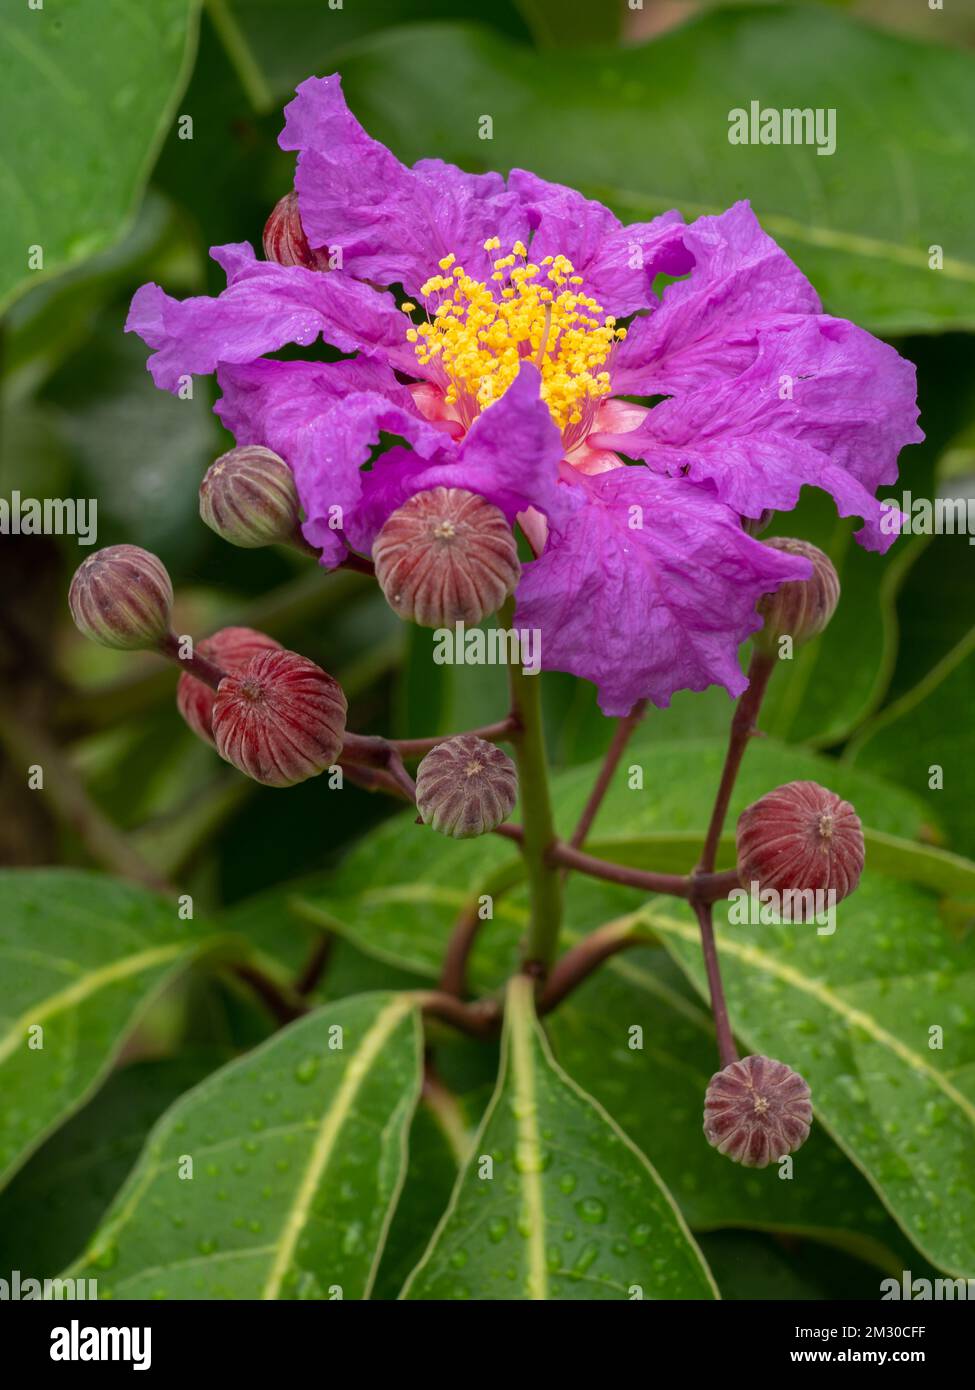 Closeup view of lagerstroemia speciosa aka crepe myrtle or pride of india flower and buds isolated on natural background Stock Photo